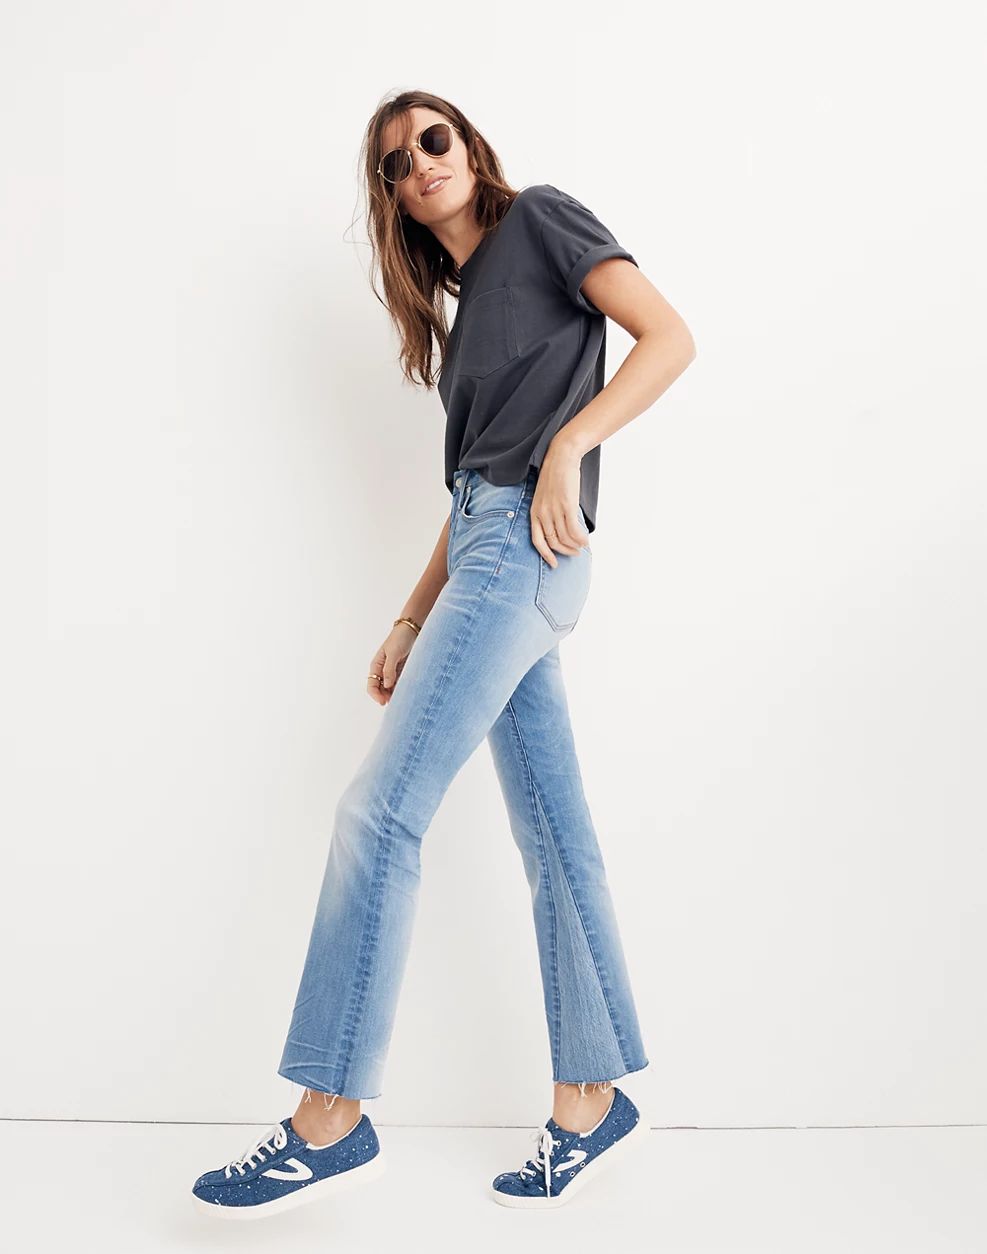 Cali Demi-Boot Jeans: Inset Edition | Madewell